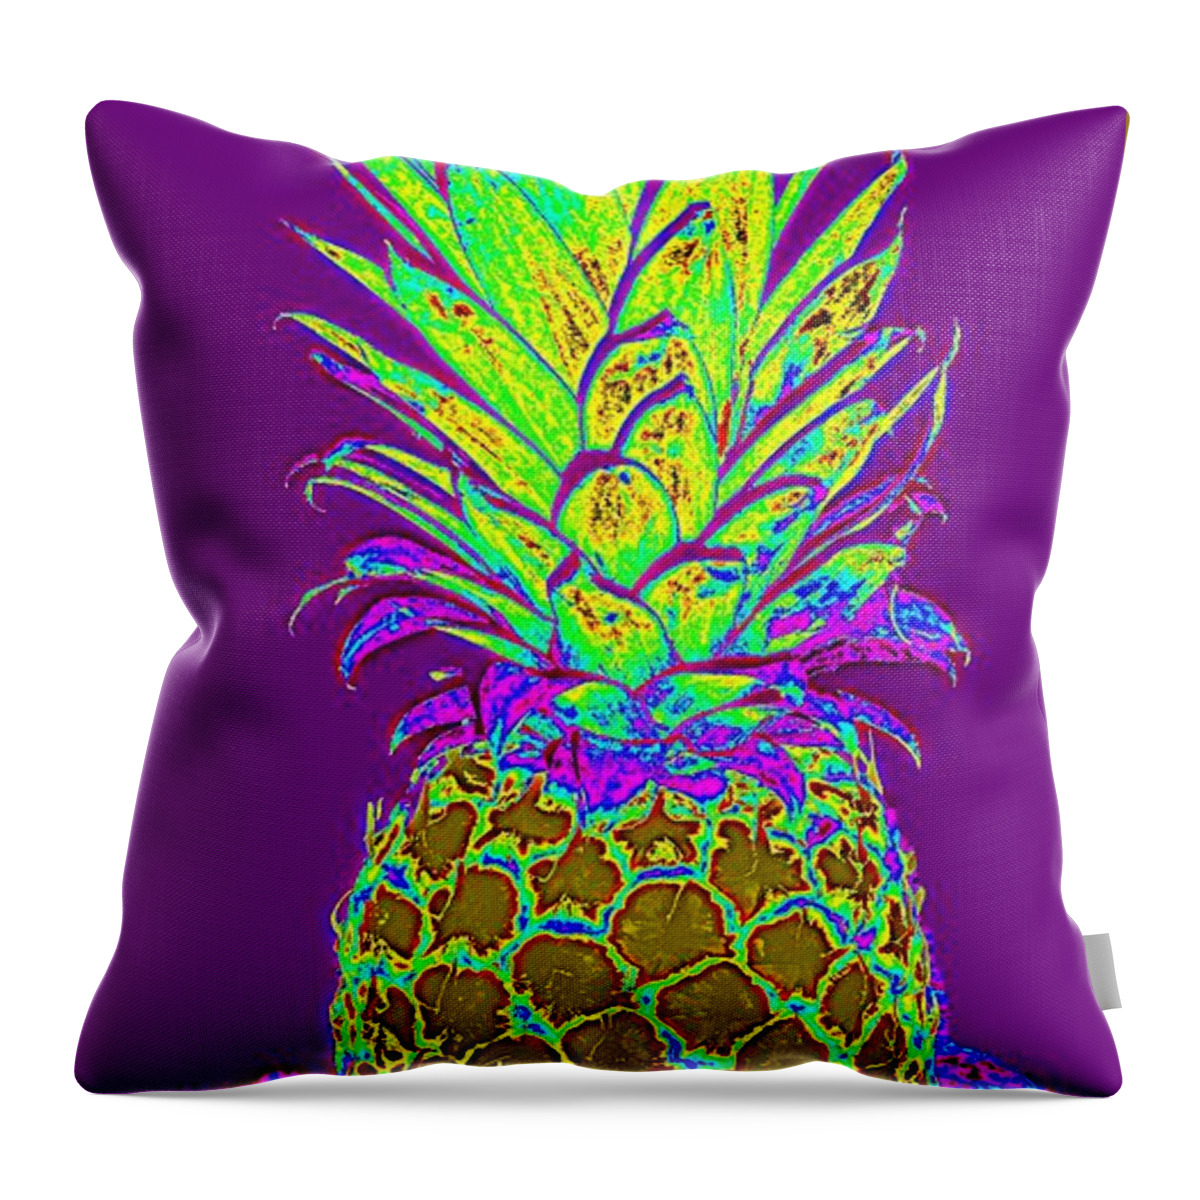 Purple Pineapple Throw Pillow featuring the digital art Purple Pineapple by Jeanne Forsythe